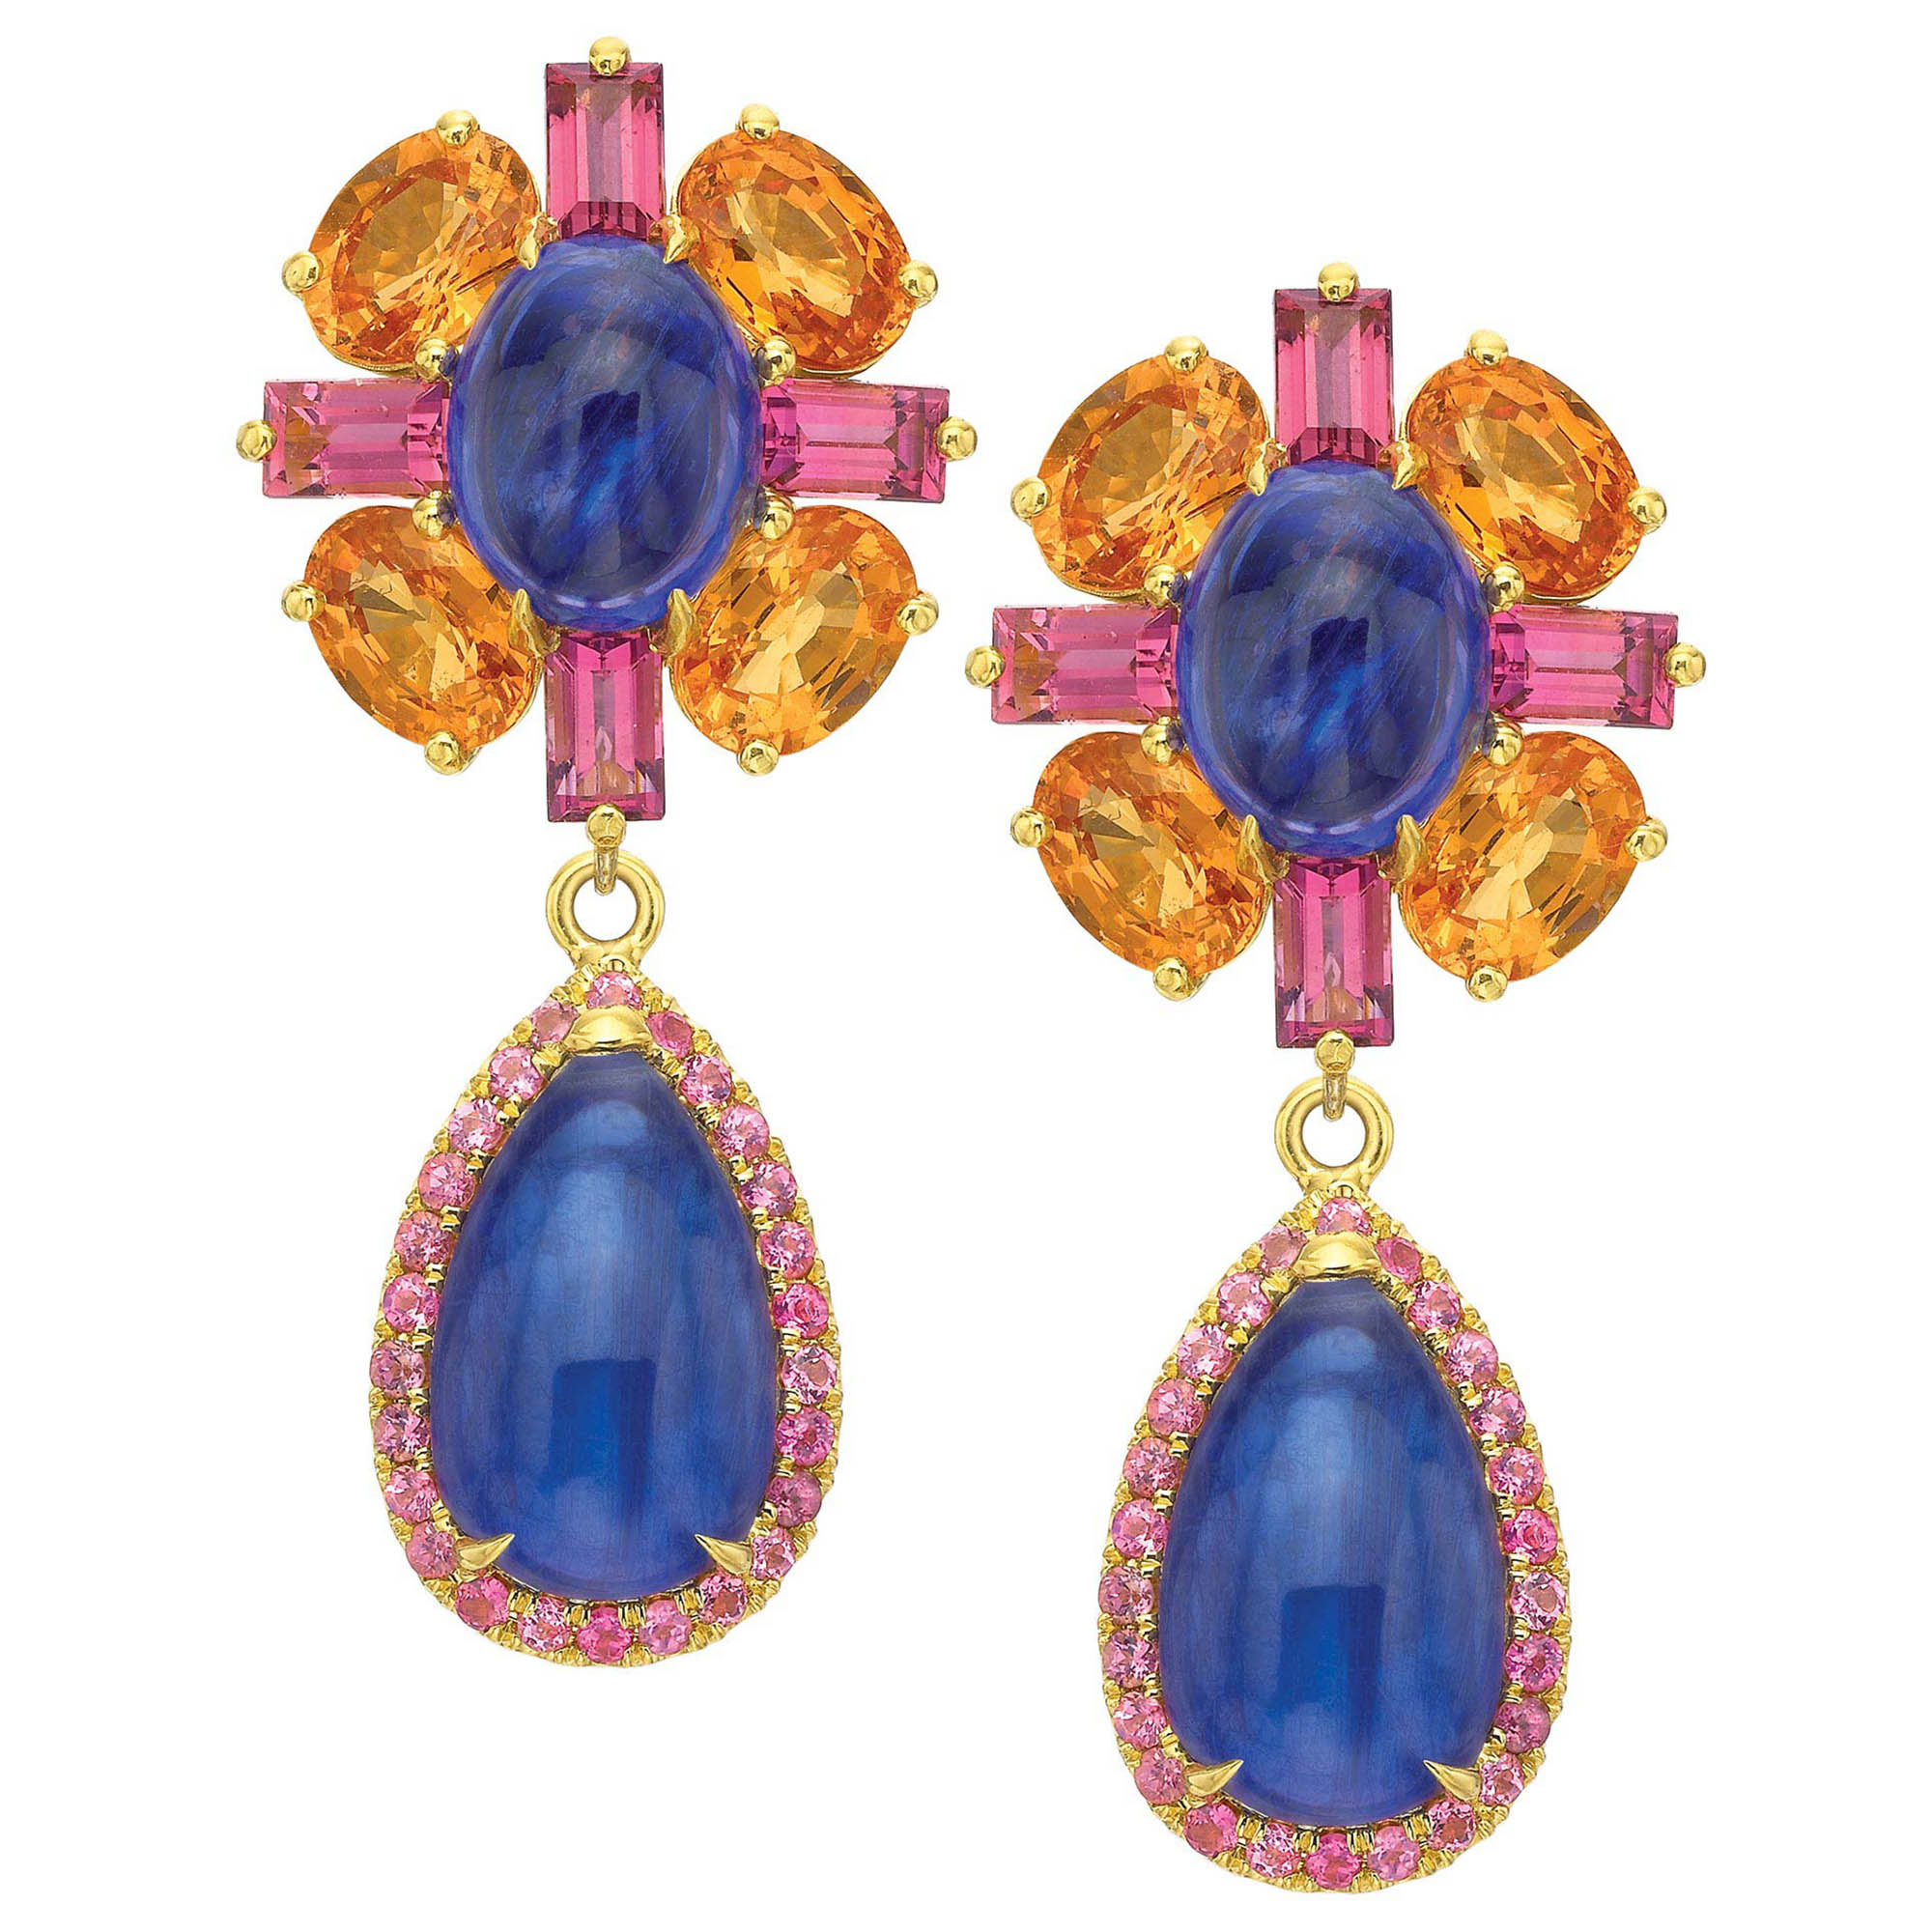 Tanzanite Cabochons with Detachable Drops Earrings | Andrew Glassford